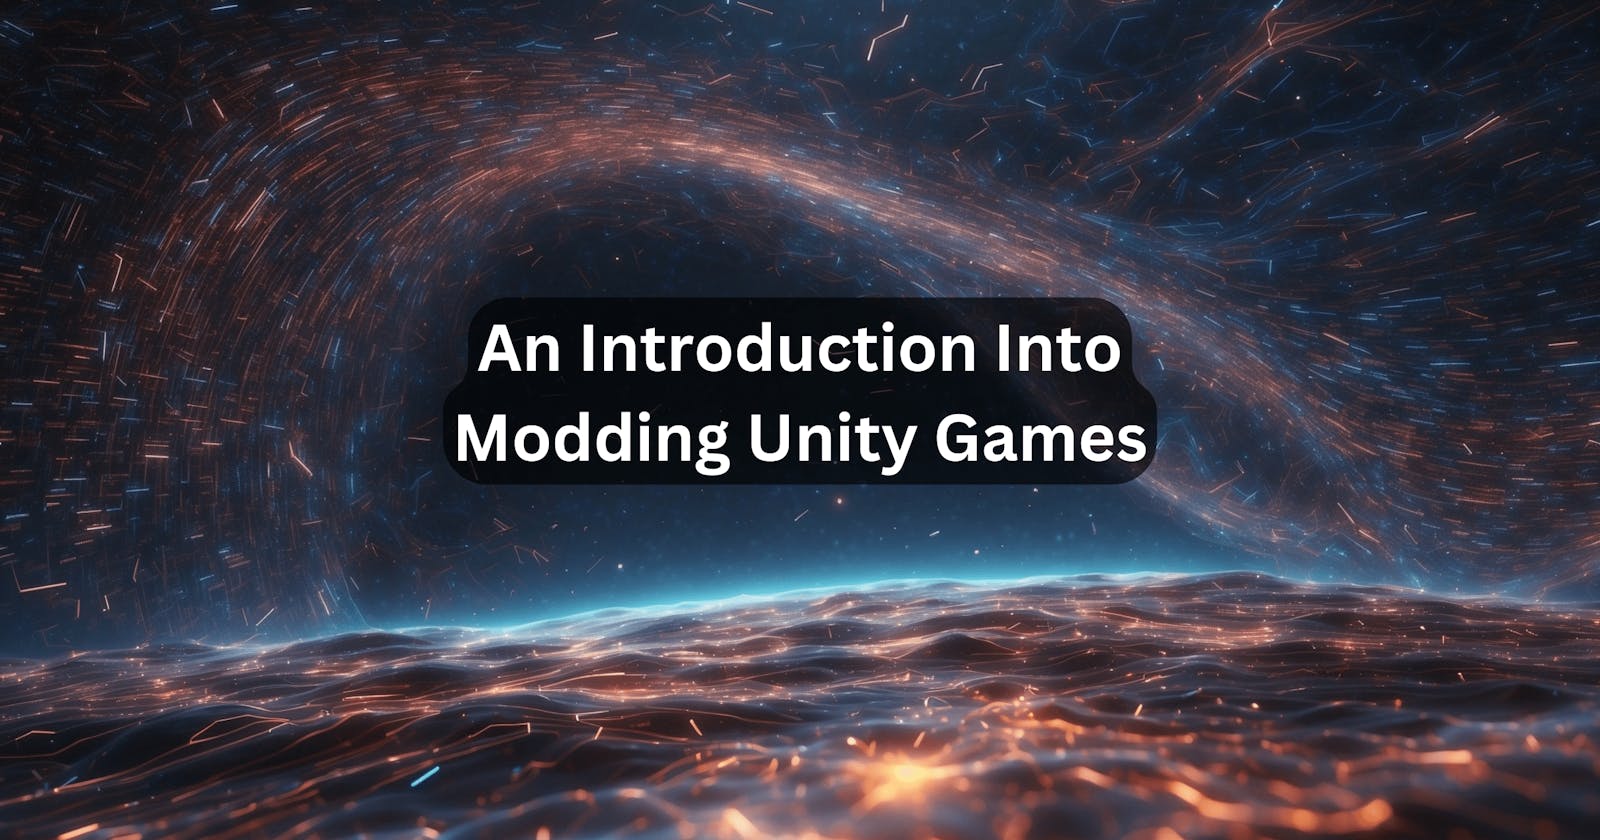 An Introduction Into Modding Unity Games